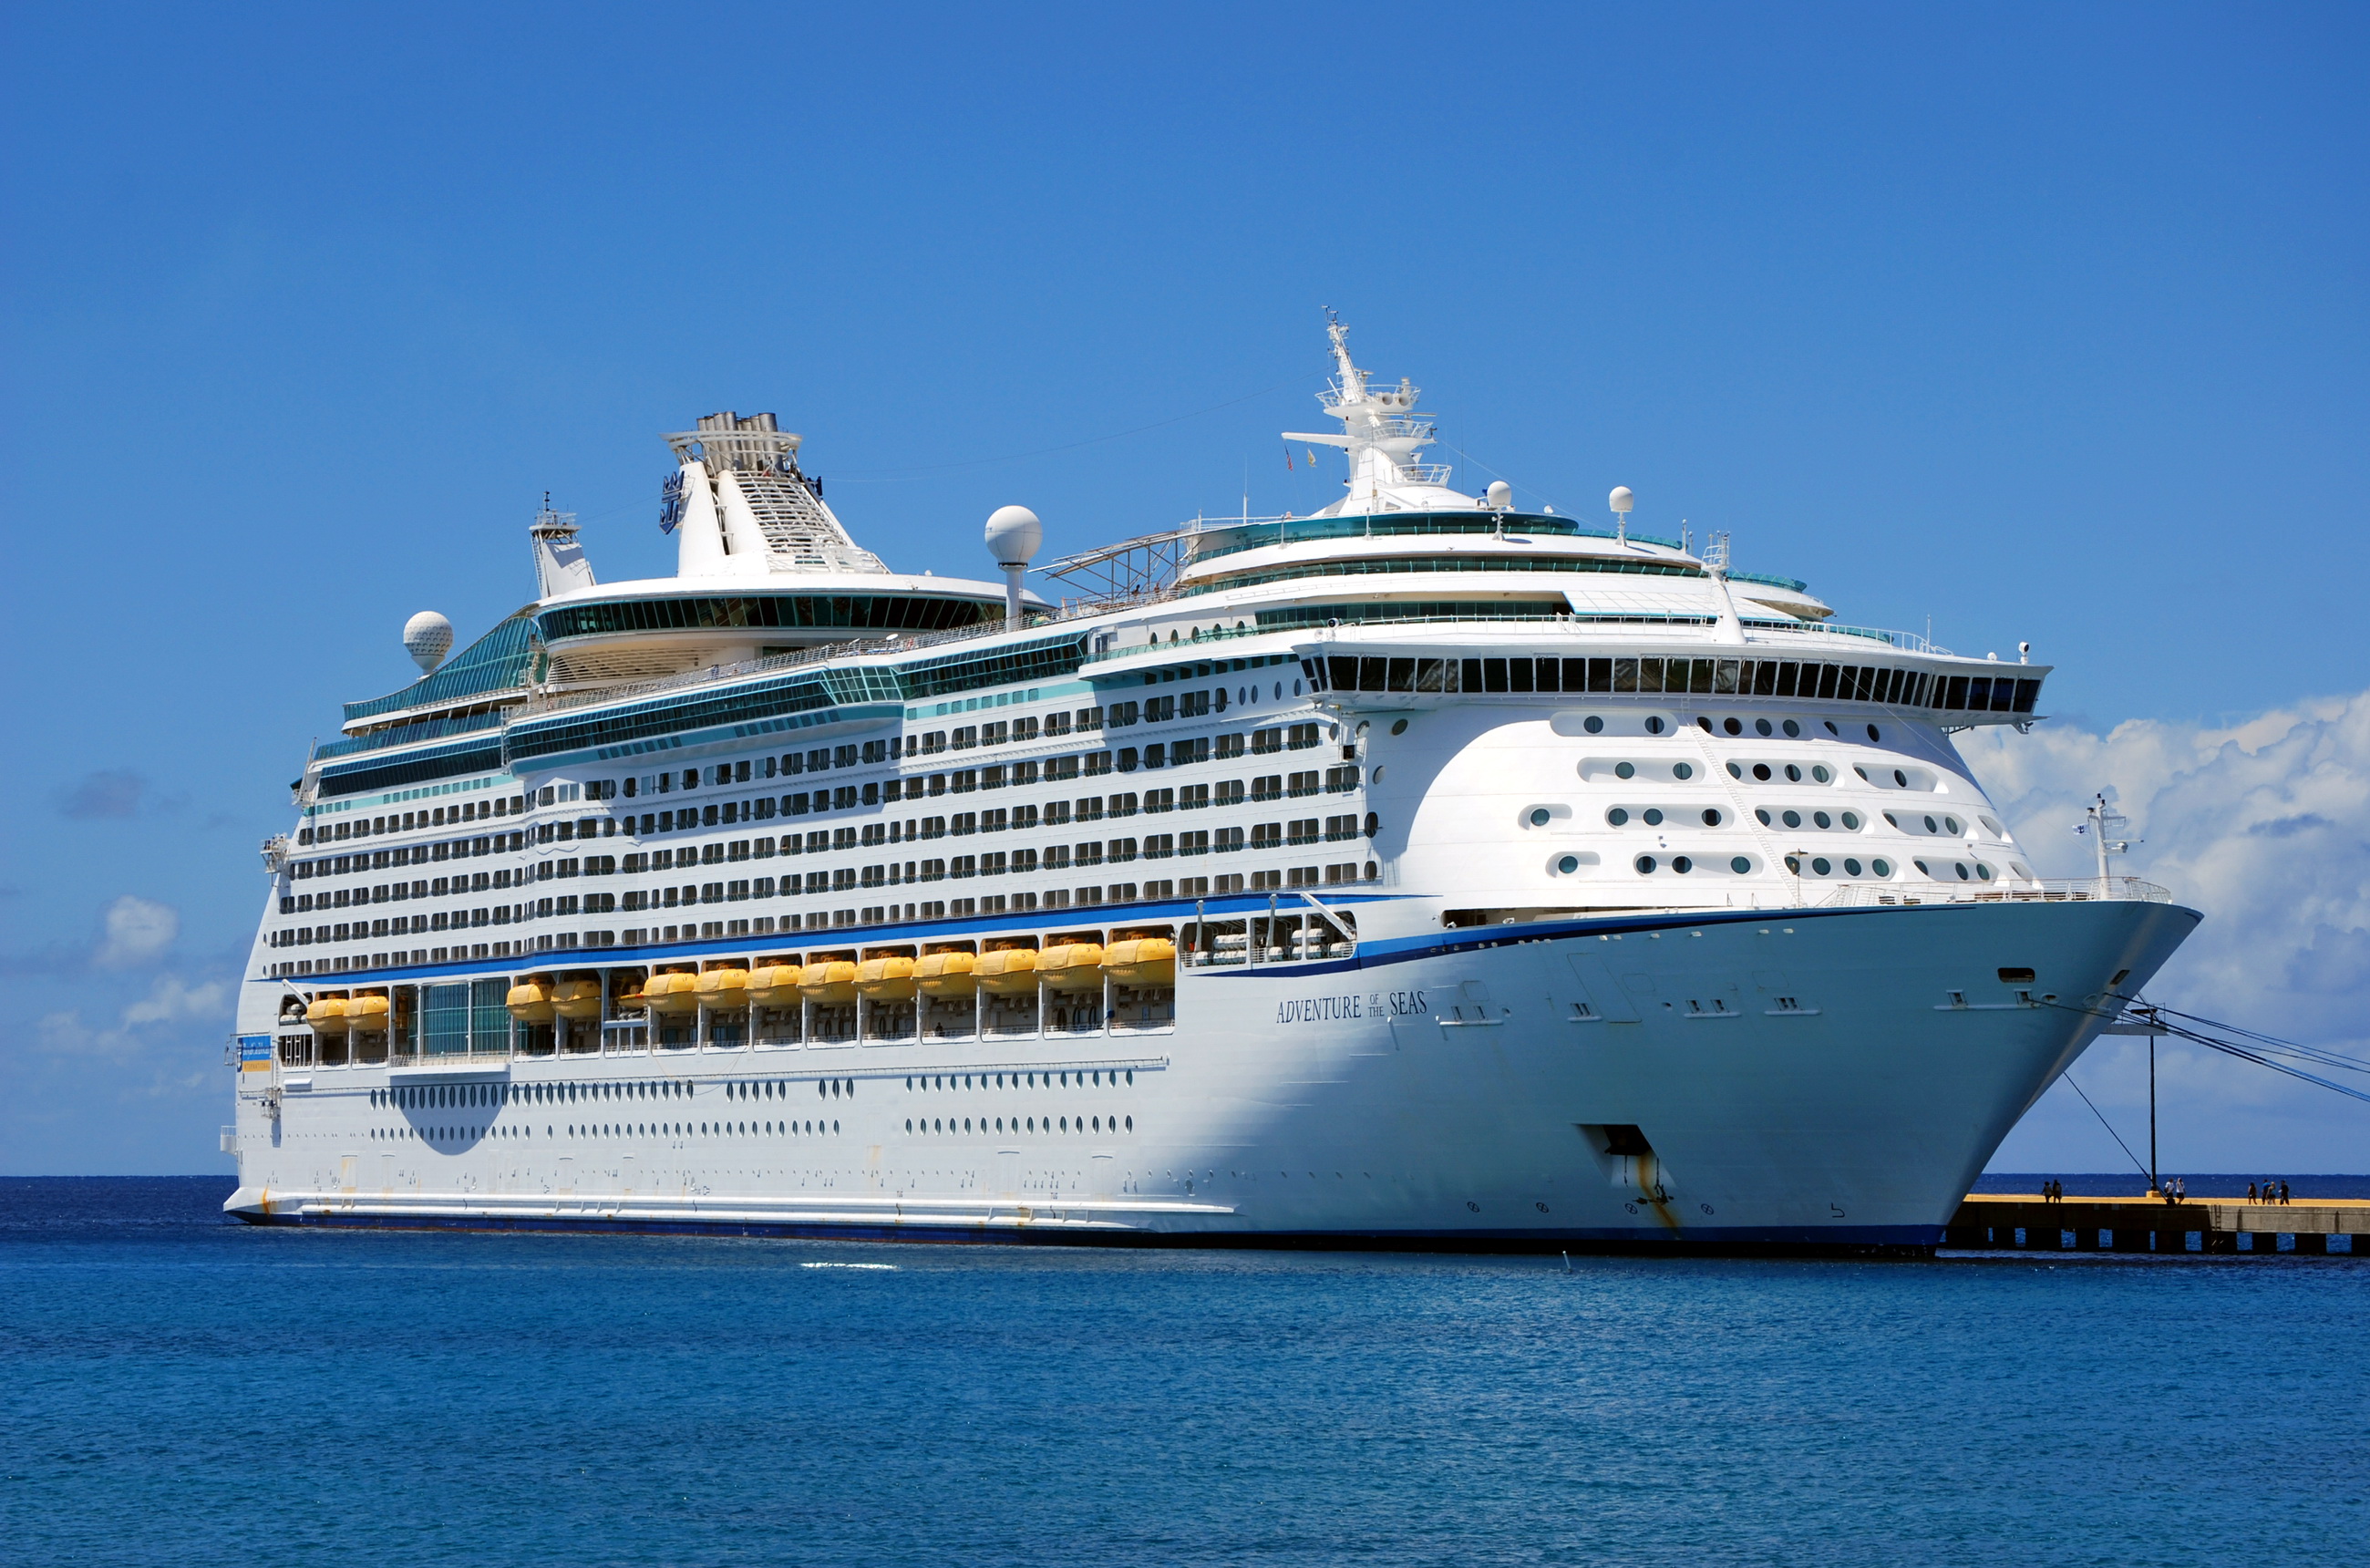 Vehicles Adventure of the seas HD Wallpaper | Background Image